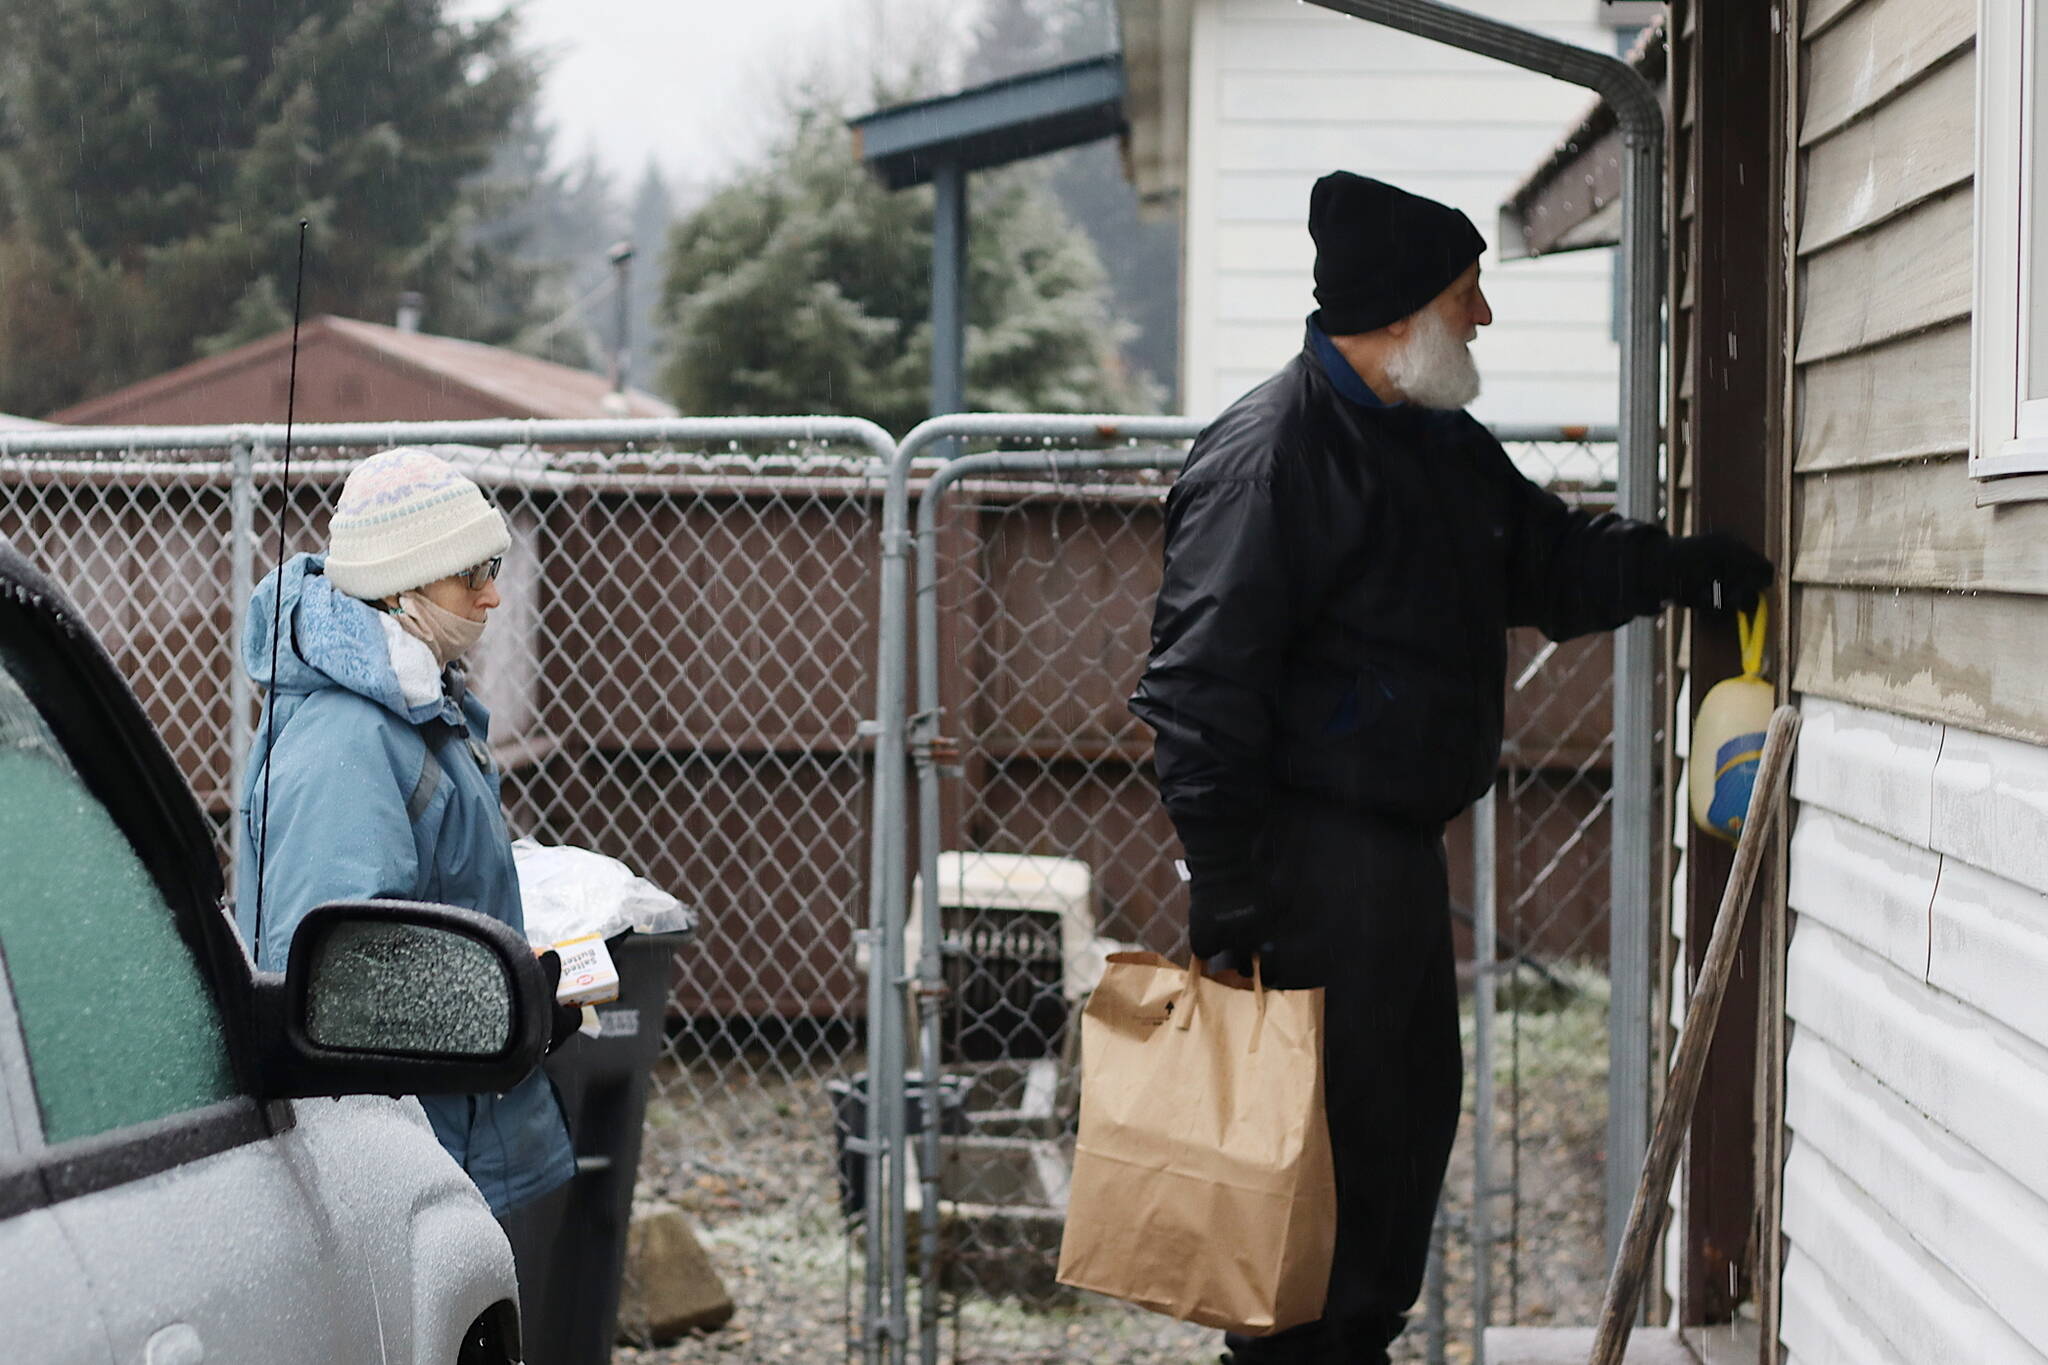 Mark Sabbatini / Juneau Empire 
Barbara Bechtold and John Tomaro deliver a Thanksgiving meal package to a Mendenhall Valley home on Saturday. The couple, both of whom have lived in Juneau since the 1970s, have made the deliveries and taken part in other volunteer efforts for many years. The estimated 300 to 400 packages being delivered this year are a collaborative effort by St. Vincent de Paul, The Salvation Army, The Glory Hall and other local entities.